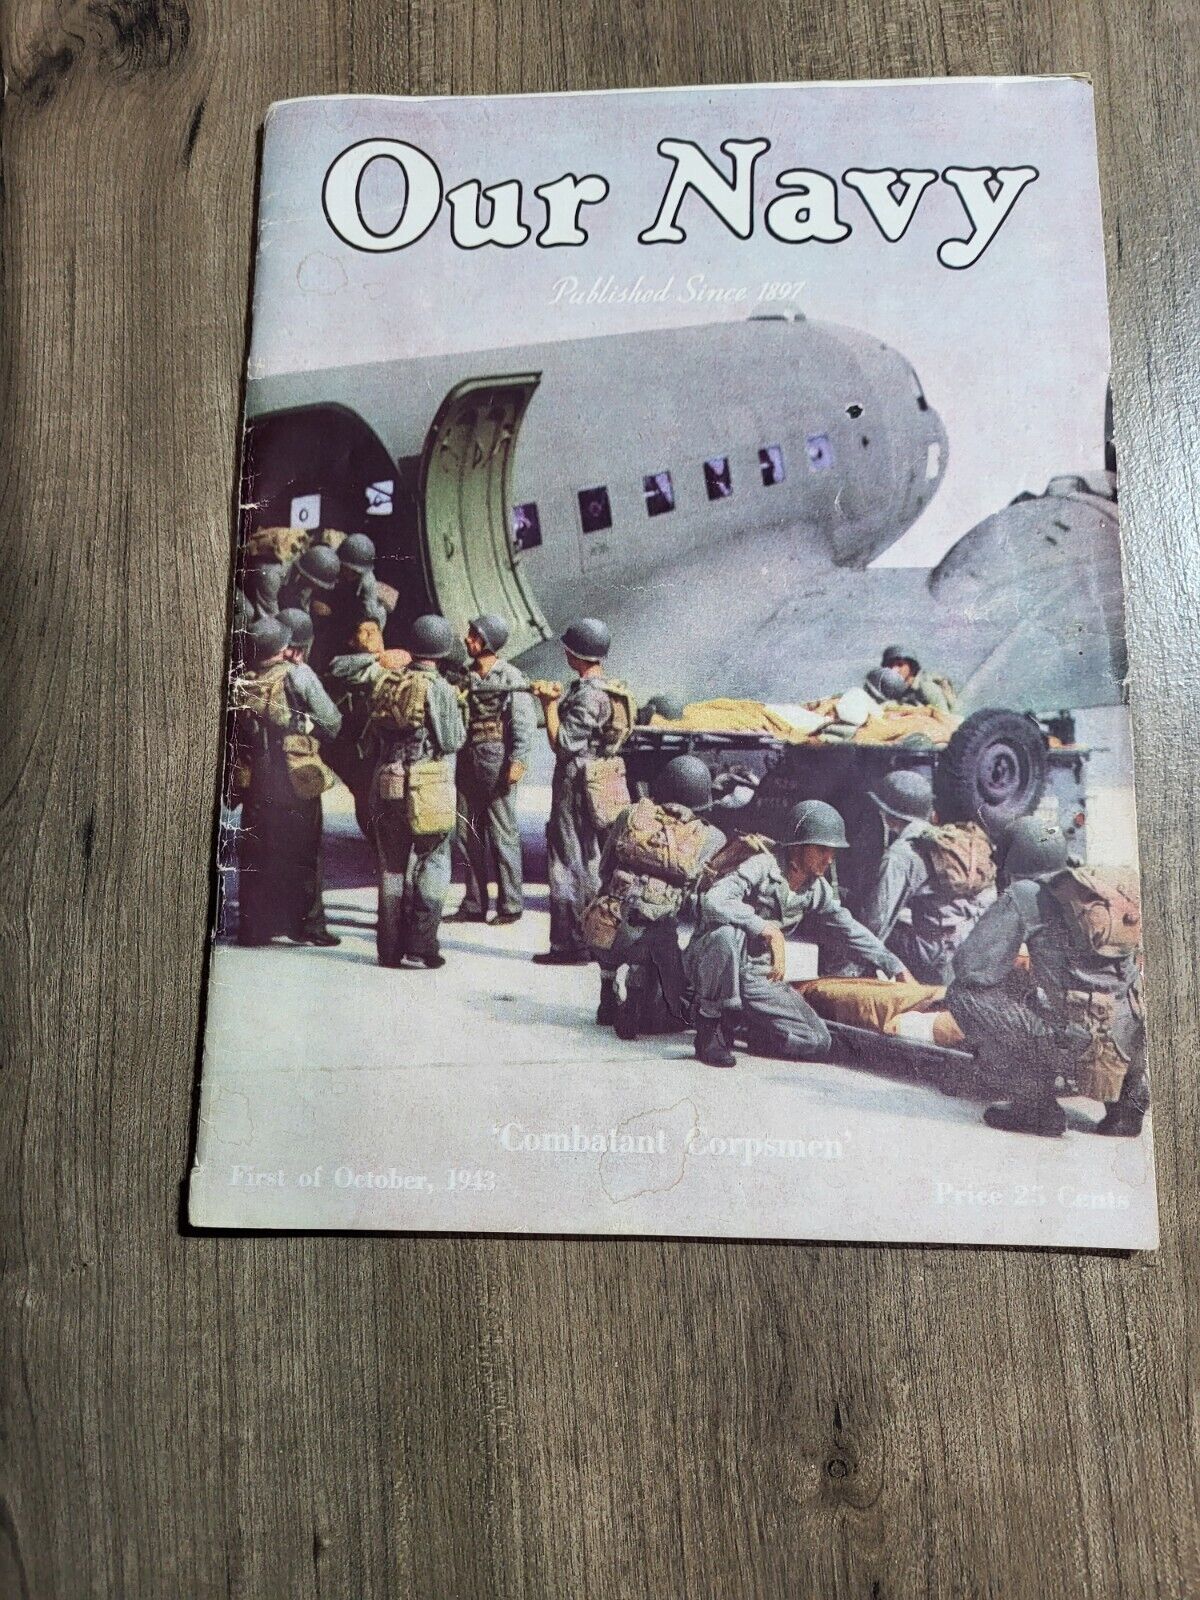 OUR NAVY MAGAZINE .  FIRST OF OCTOBER, 1943. ORIGINAL ISSUE. VERY GOOD.